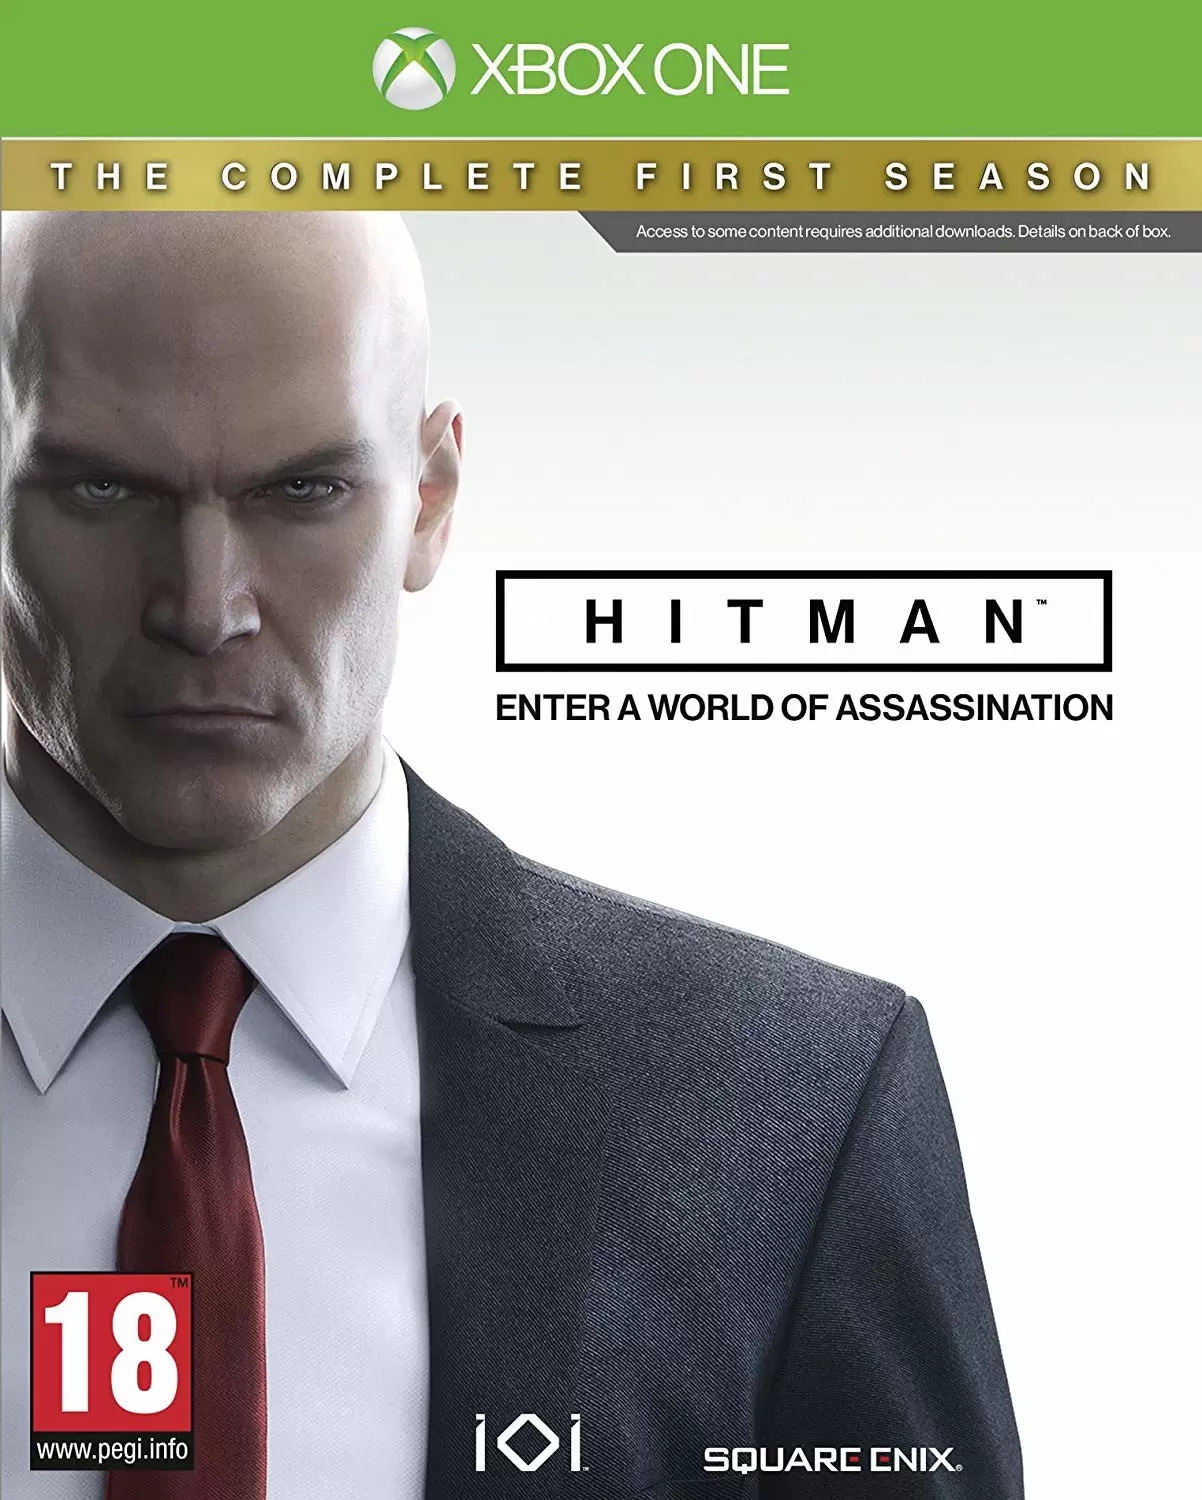 XBOX One Games - Hitman : The complete First Season